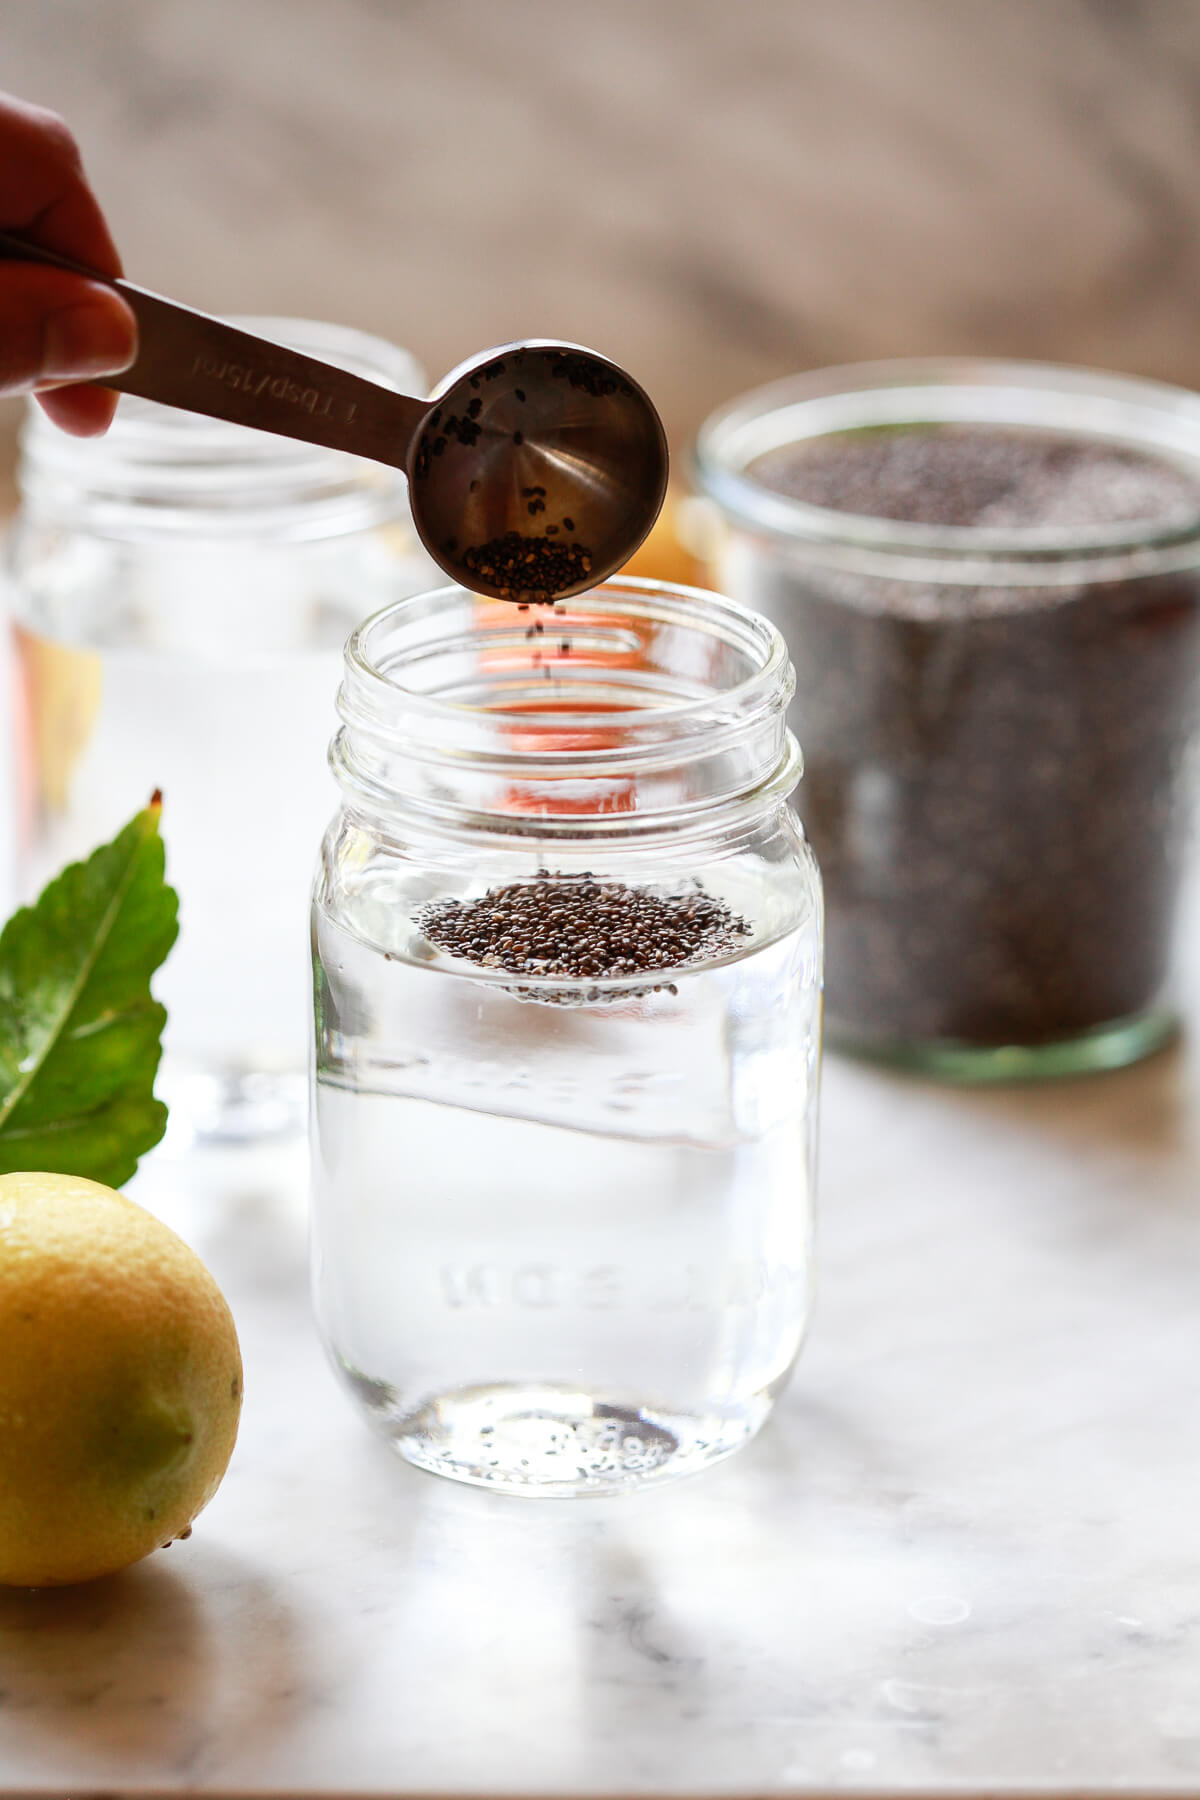 A tablespoon of chia seeds is poured into a mason jar filled with water.